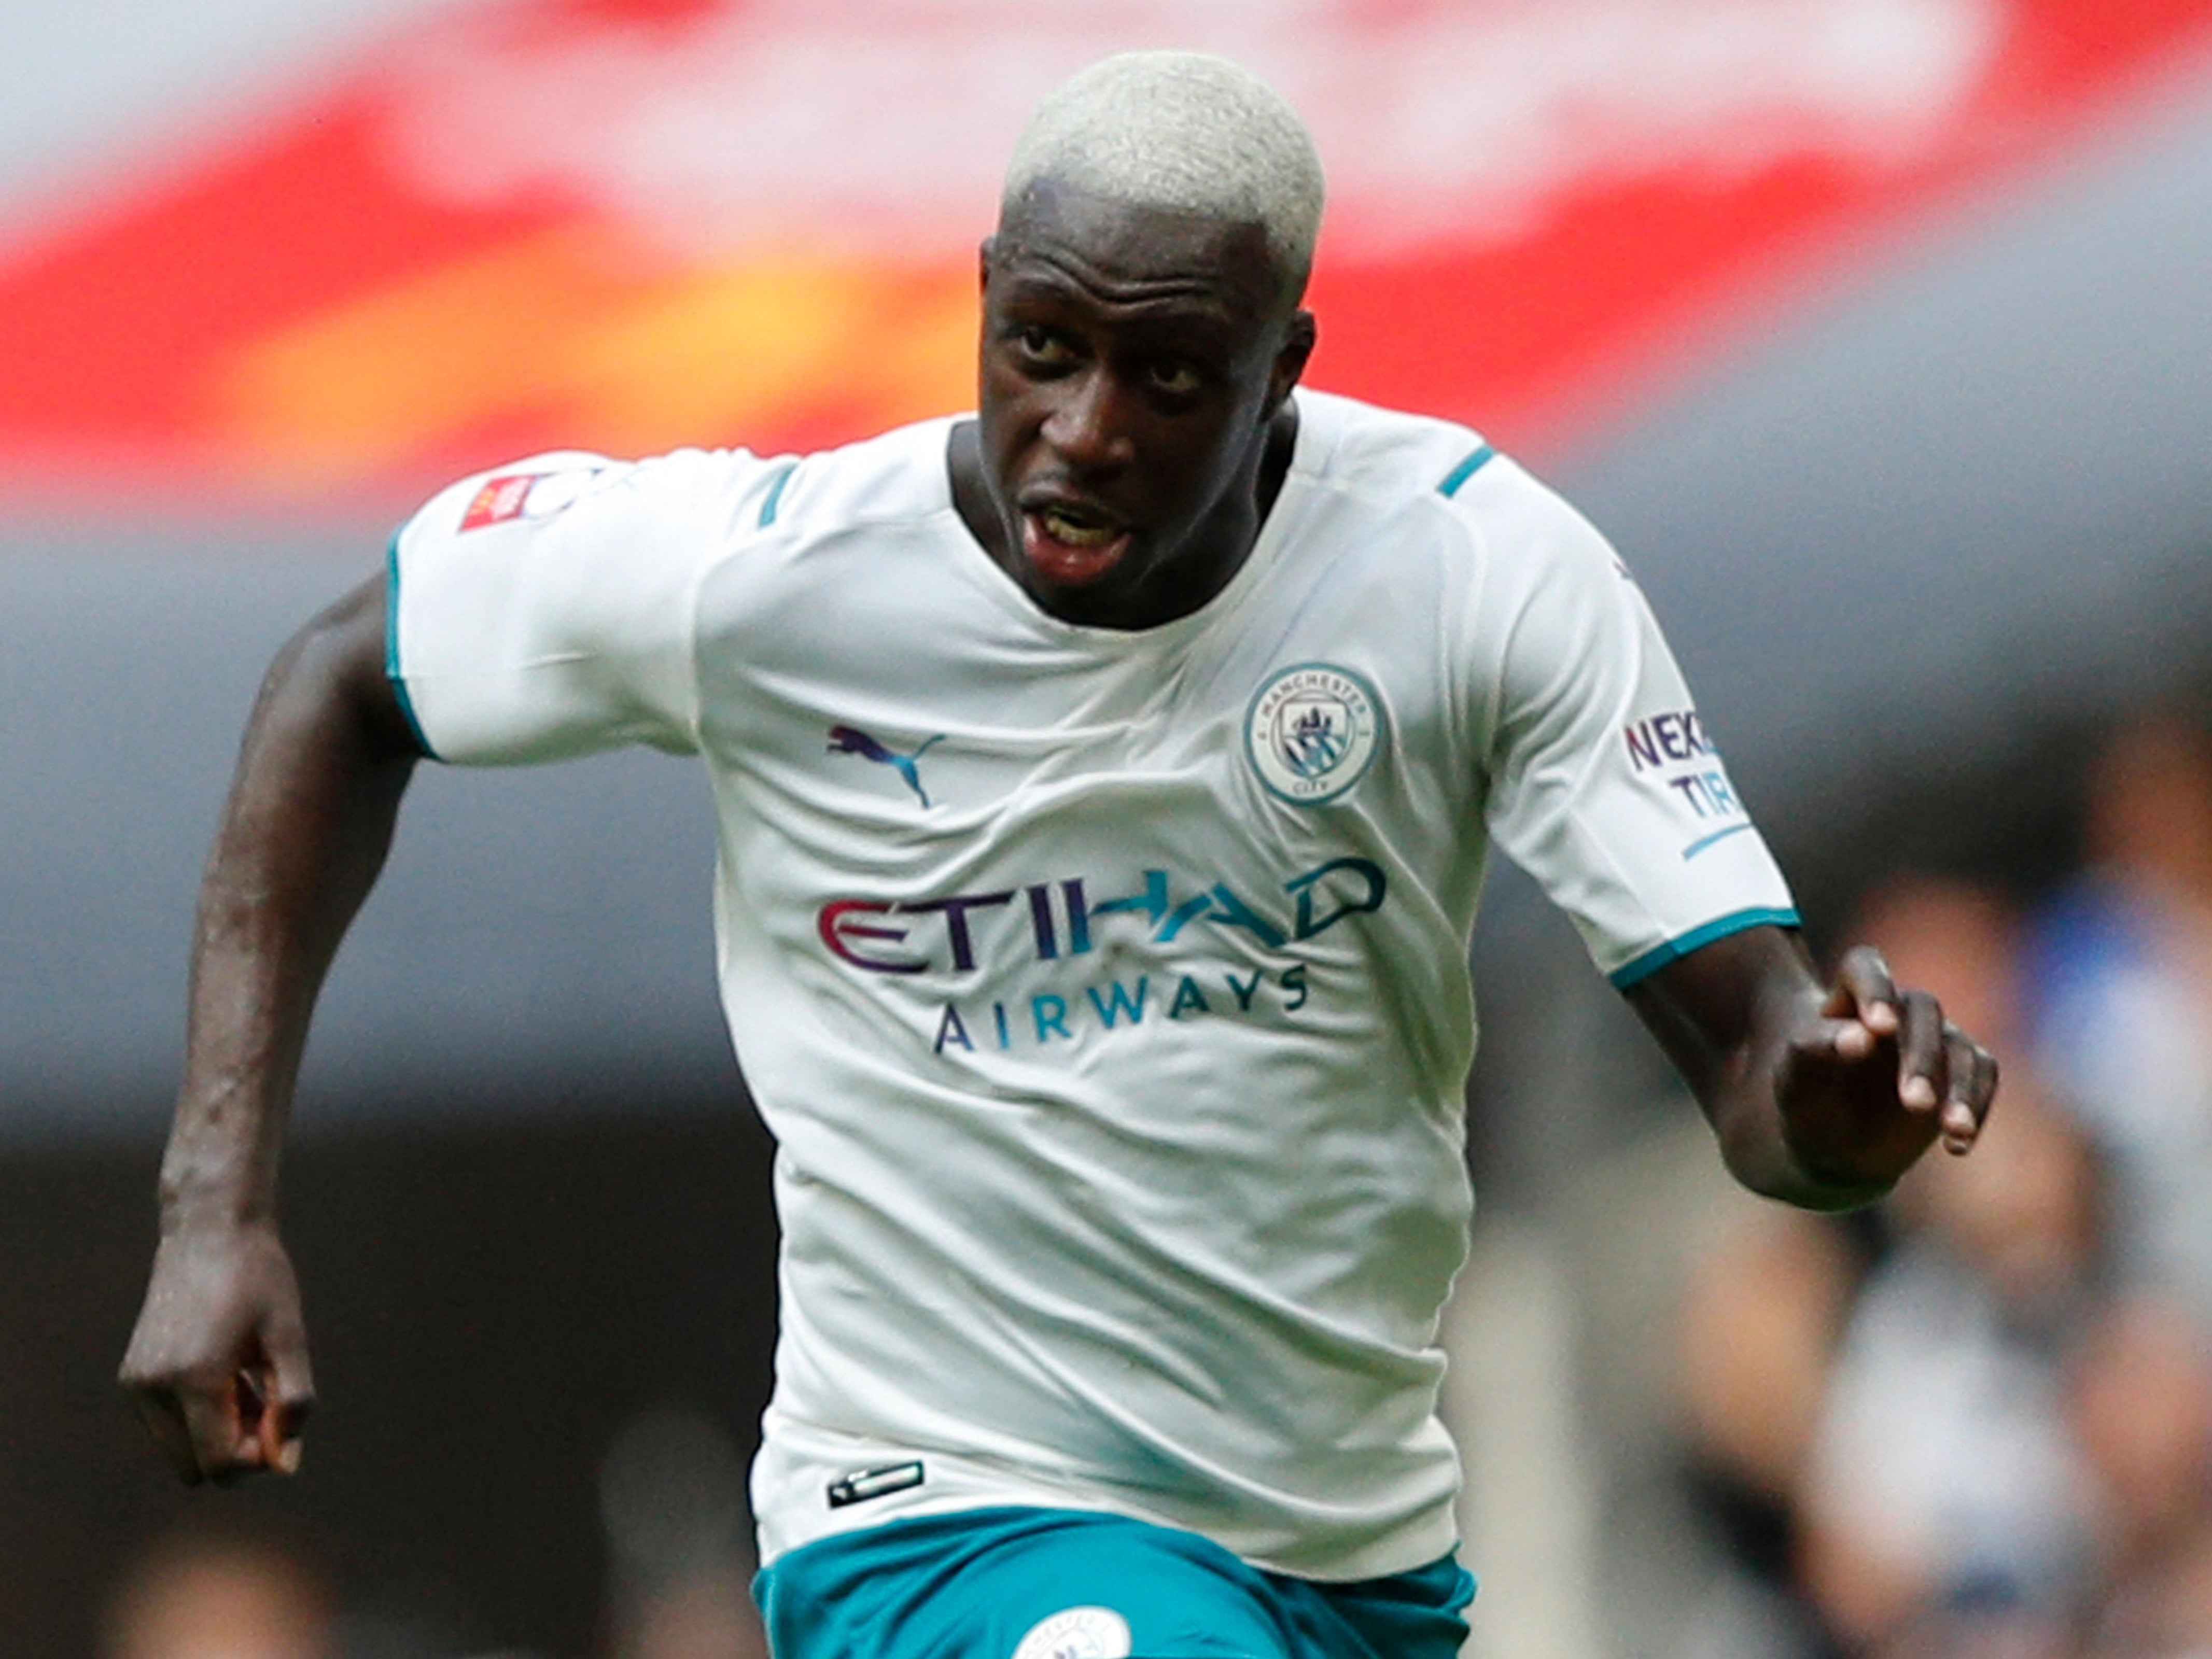 Benjamin Mendy has been charged with four counts of rape by Cheshire Constabulary